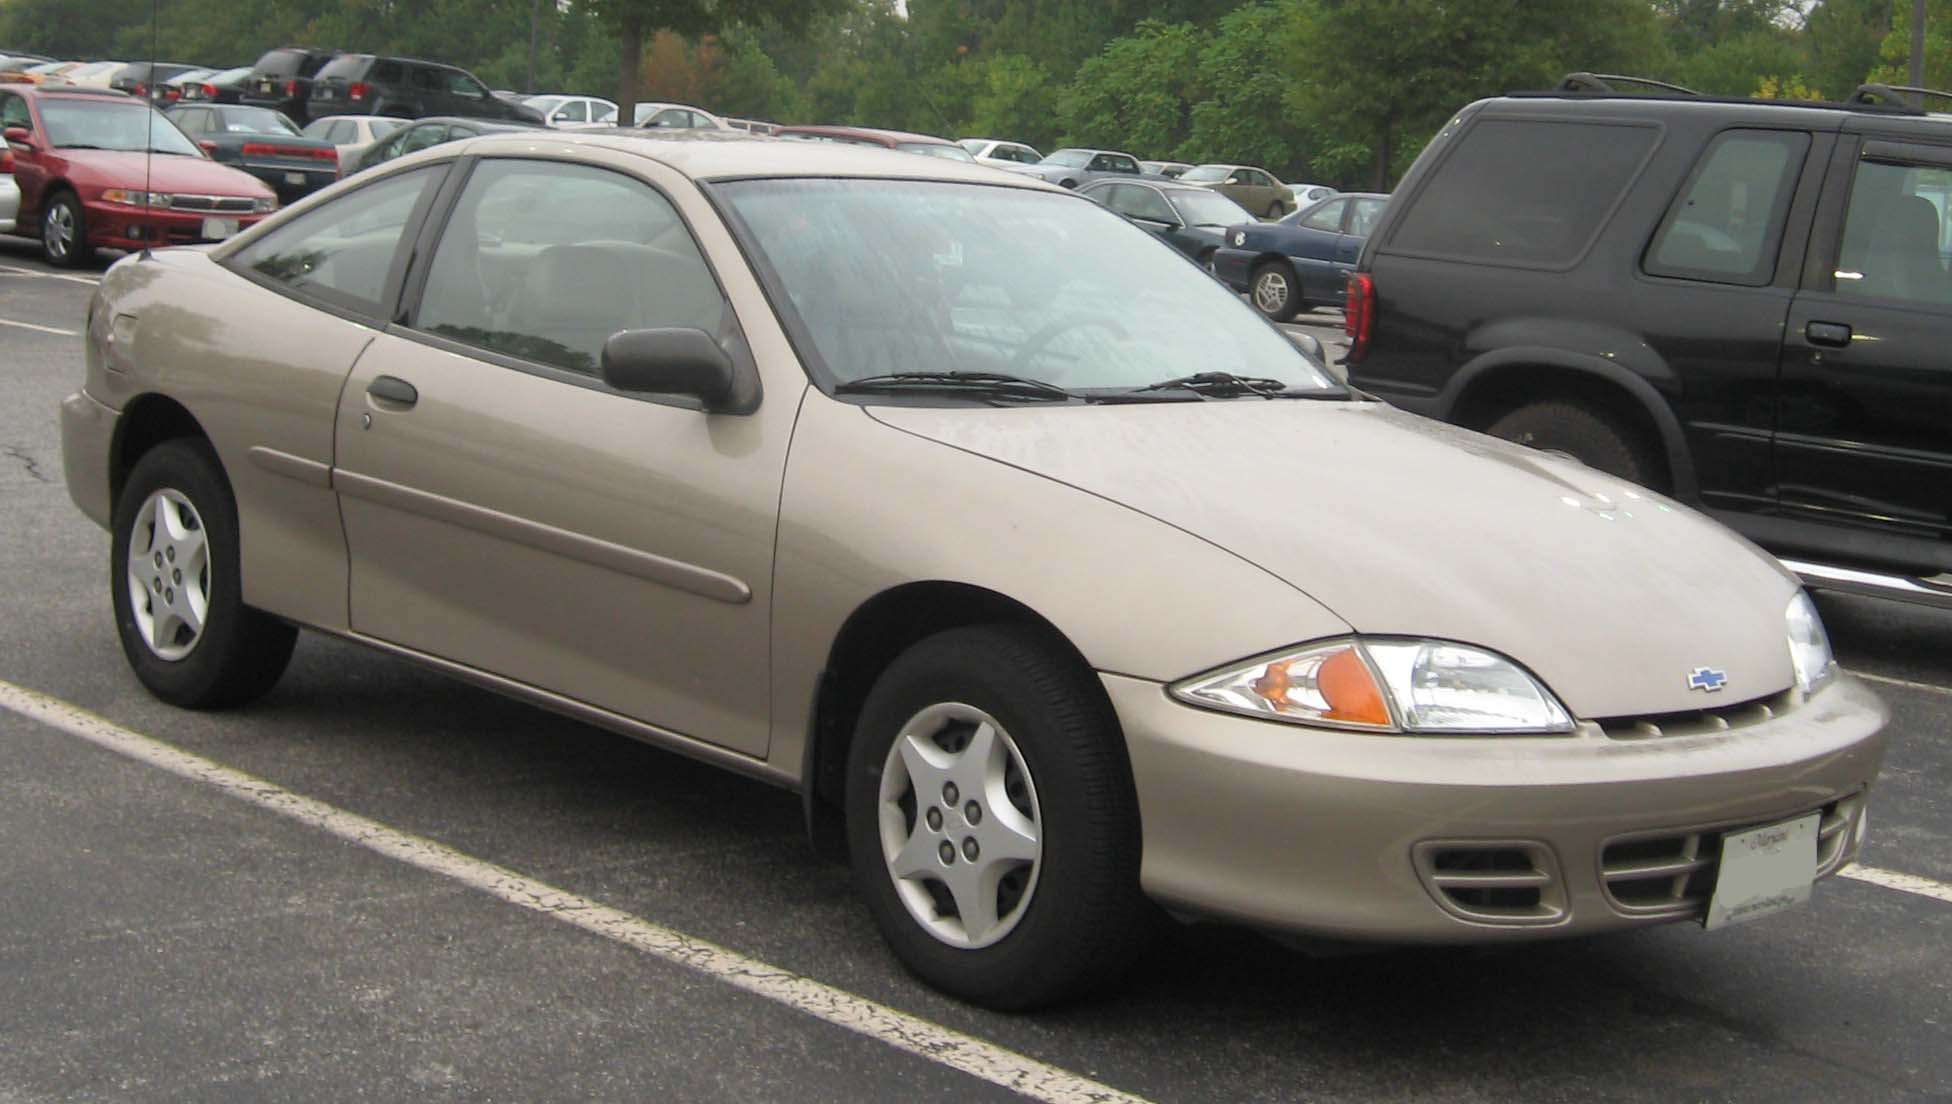 File:2000-2002 Chevrolet Cavalier Coupe.jpg - Wikimedia Commons